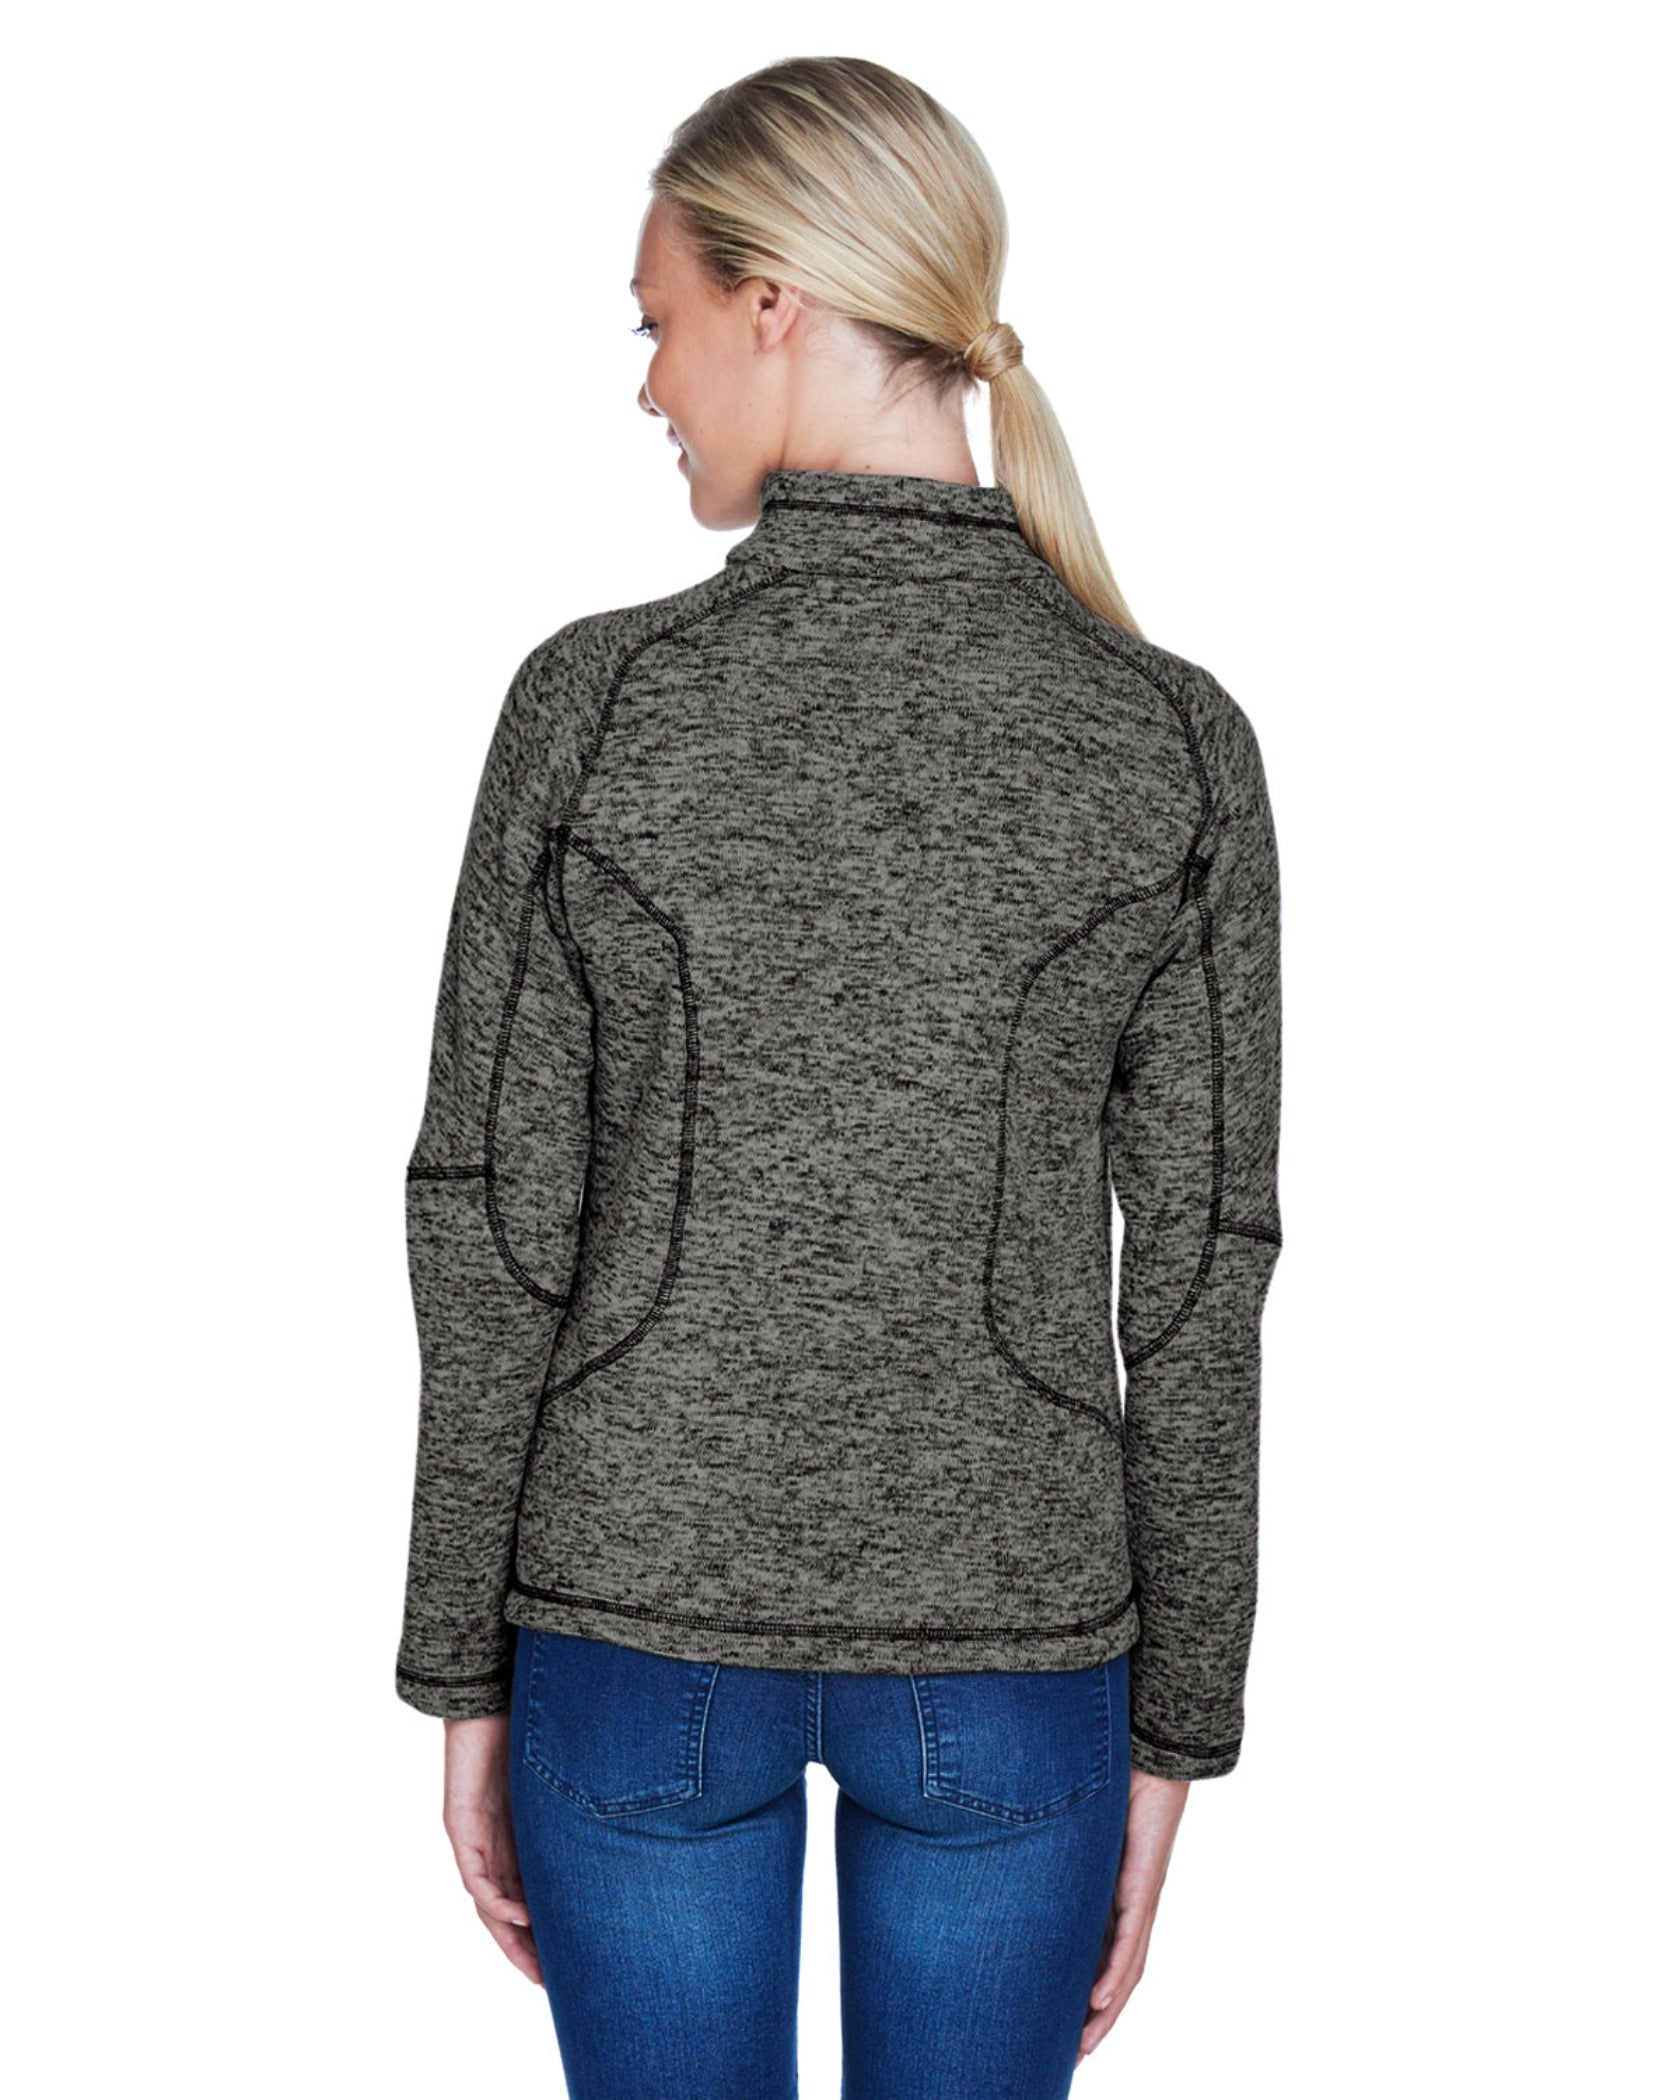 Charcoal Heather Sweater Back